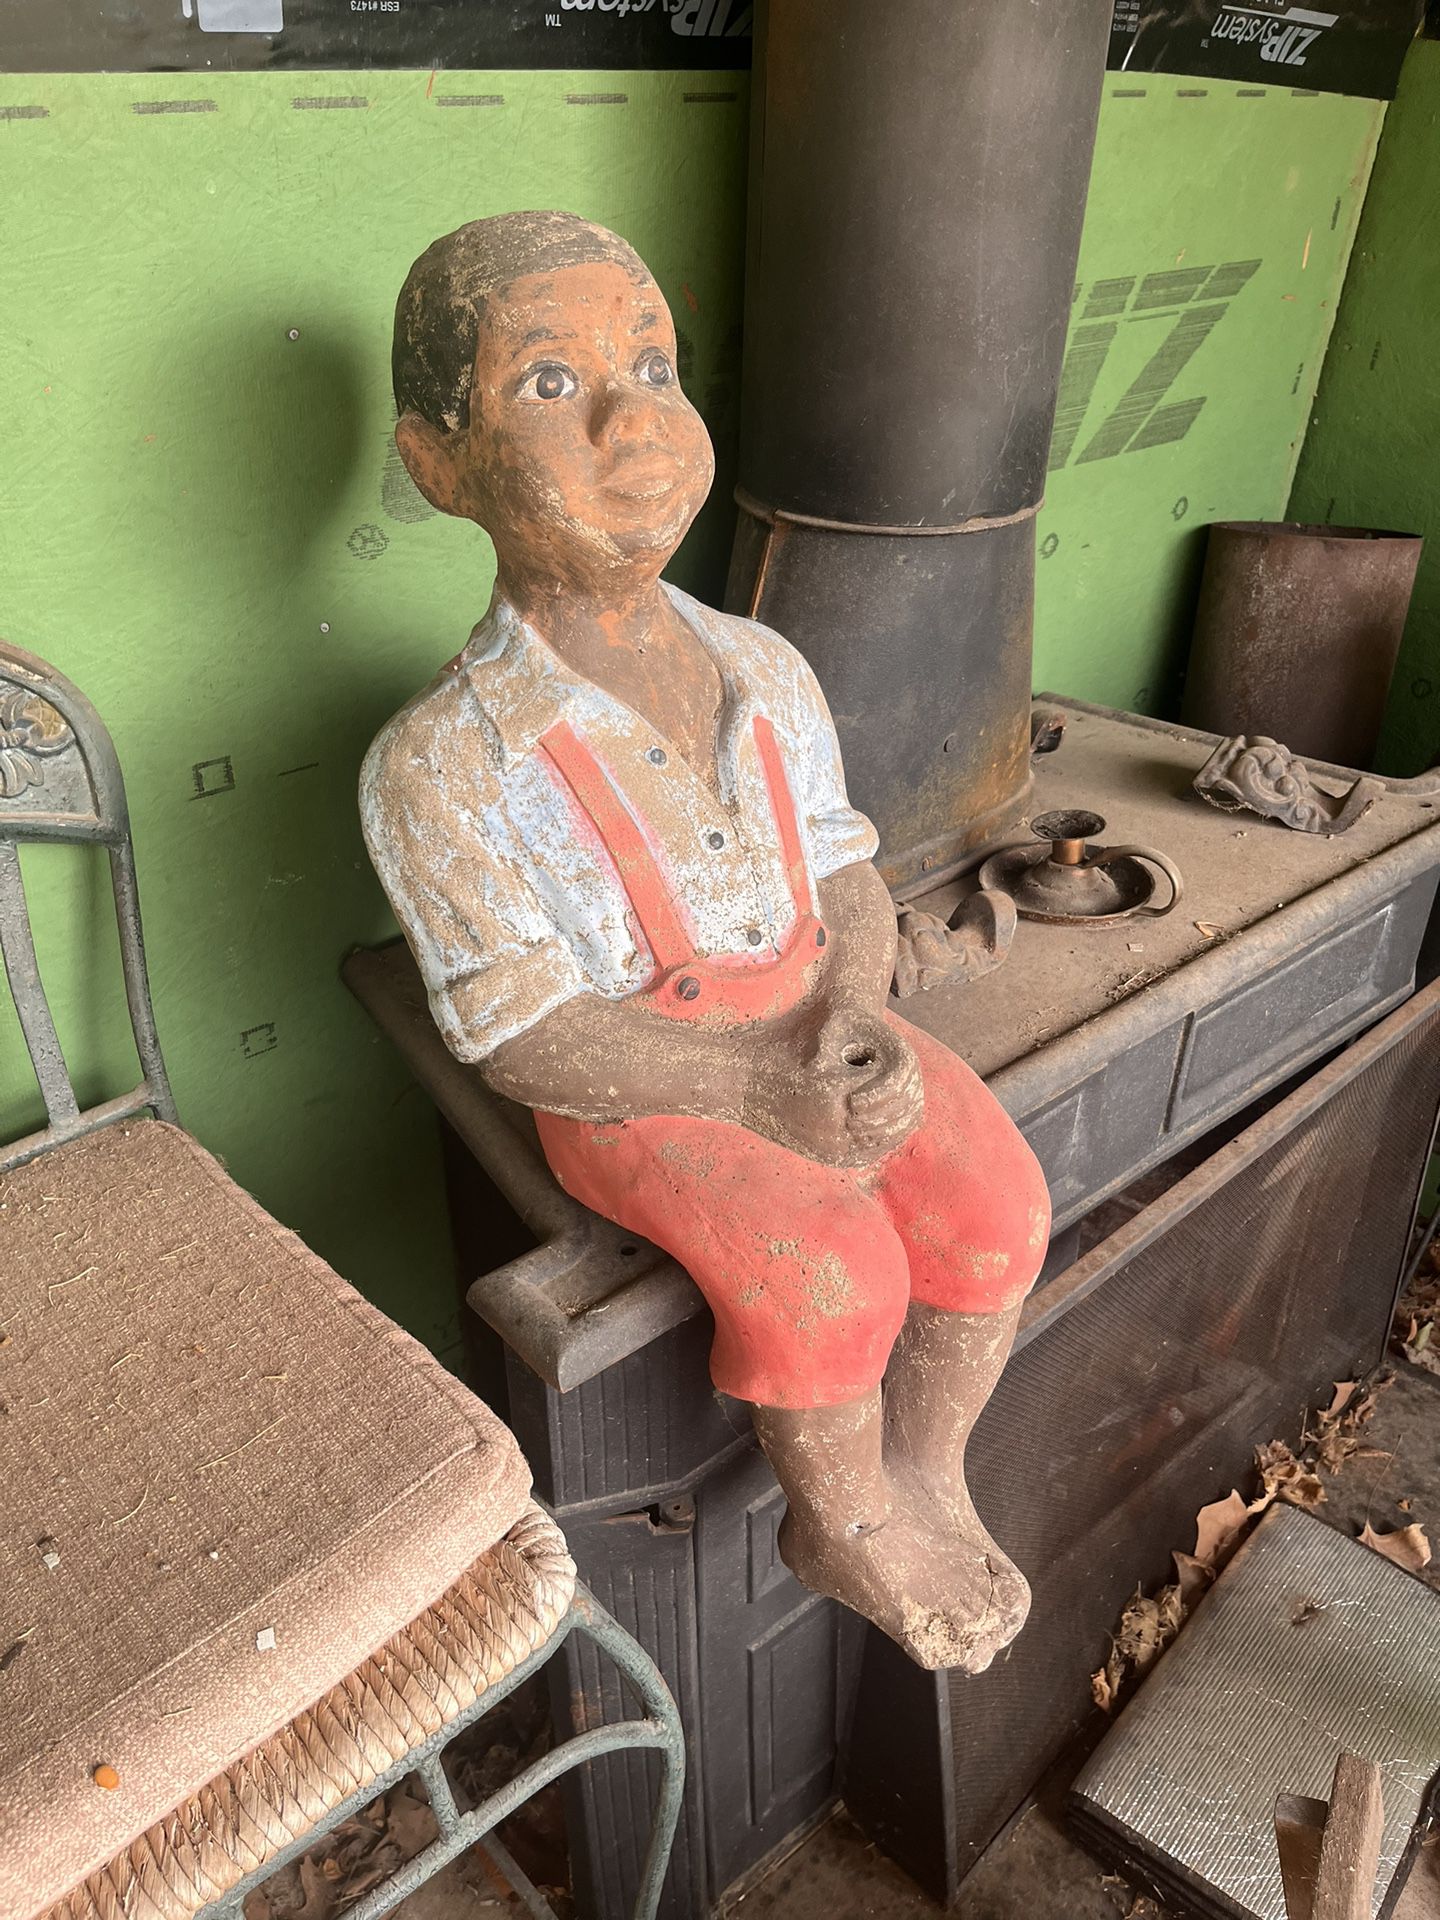 Americana Concrete Fishing Boy Statue for Sale in Godley, TX - OfferUp